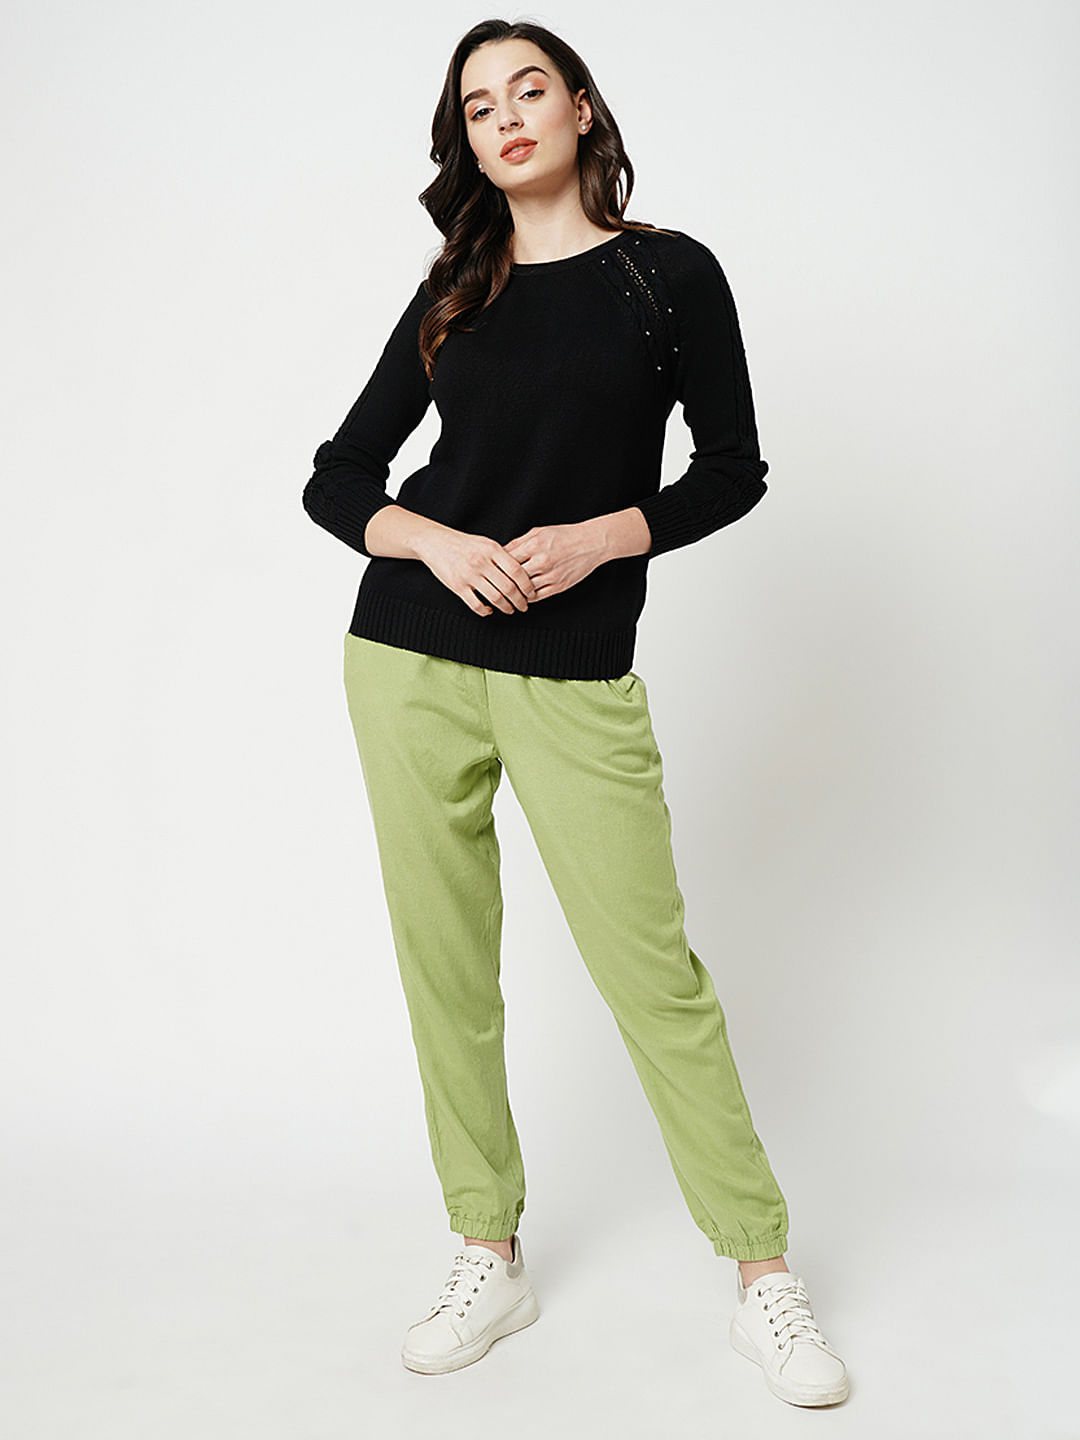 Business Woman Light Olive Green Wide-Leg Trouser Pants | Olive pants  outfit, Green pants outfit, Green trousers outfit